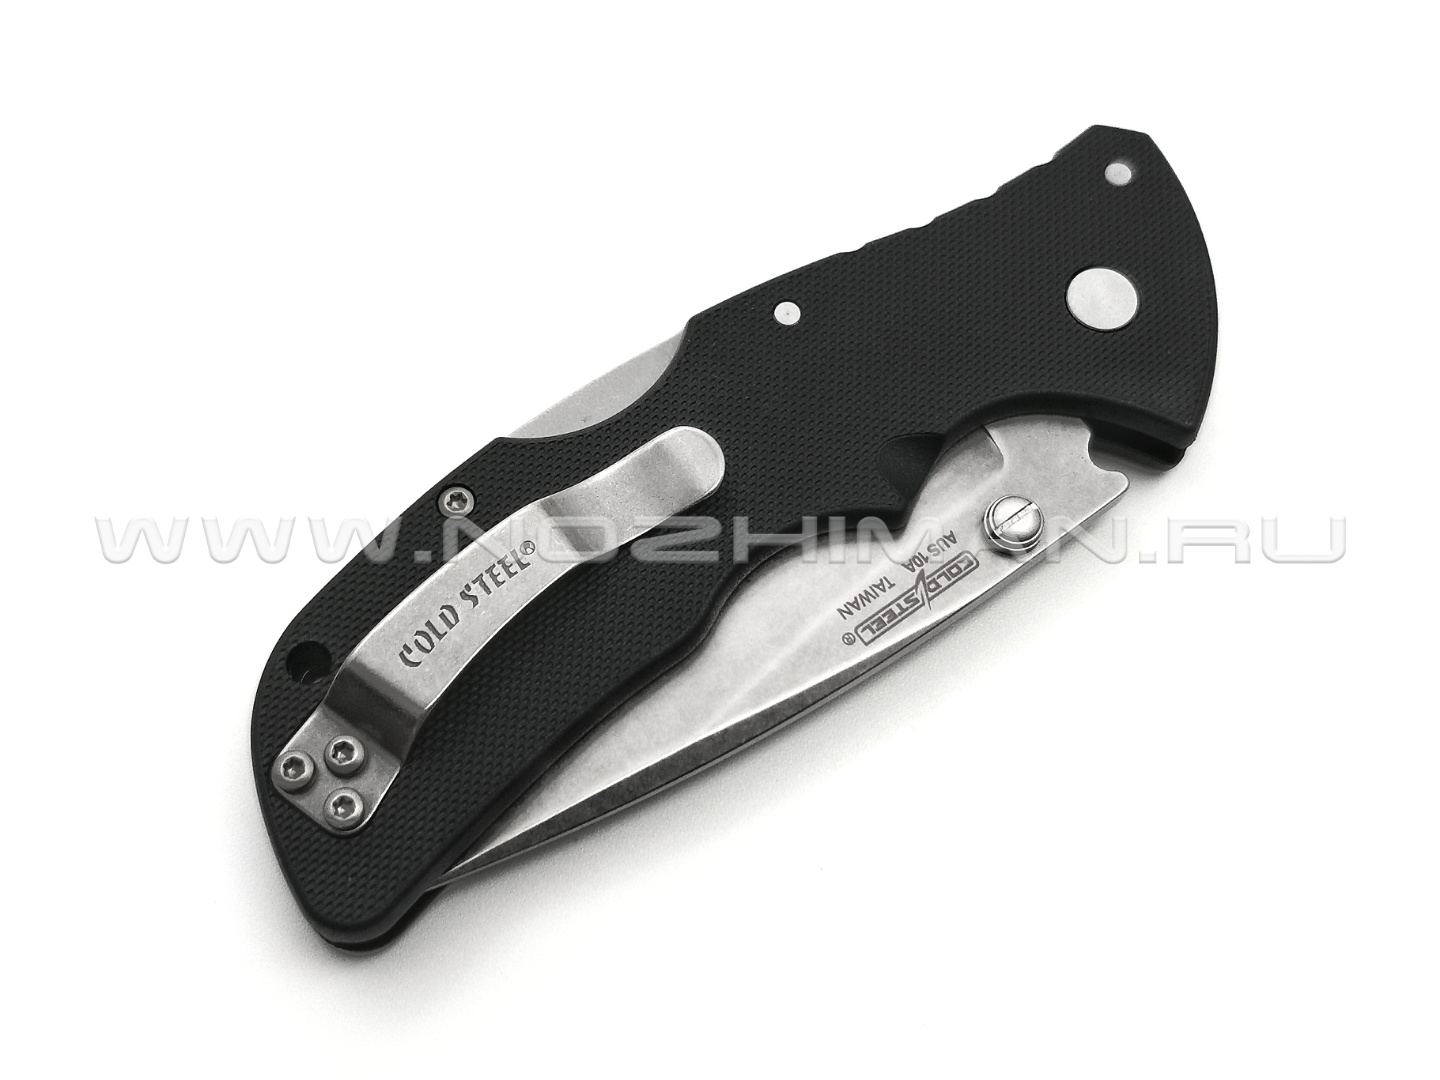 Cold Steel нож Mini Recon 1 Spear Point 27BAS сталь Aus 10A, рукоять GRN